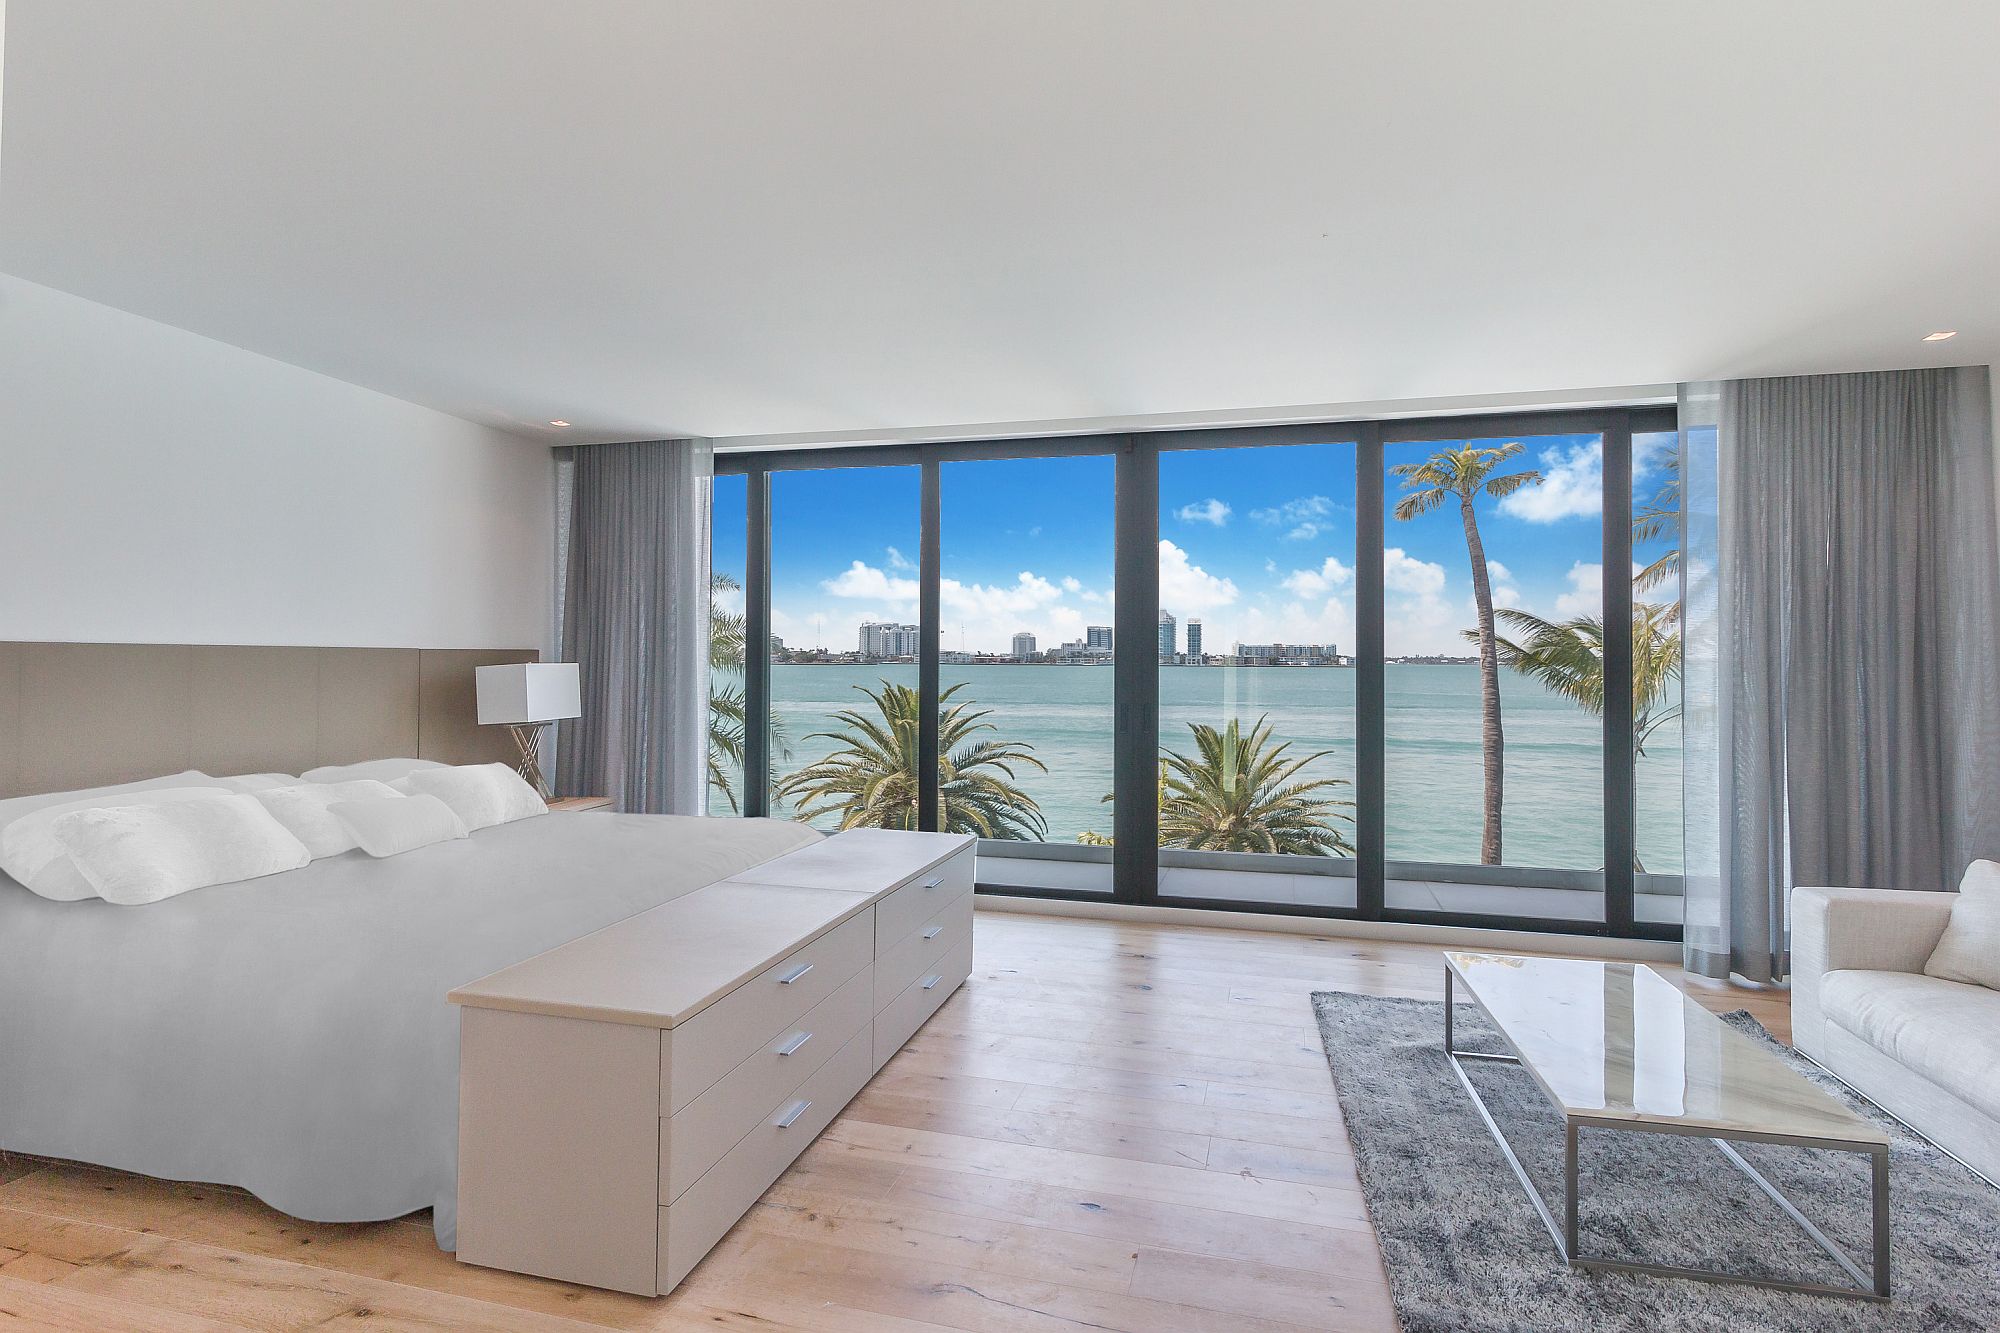 Look-inside-one-of-the-7-bedrooms-of-the-lavish-Miami-home